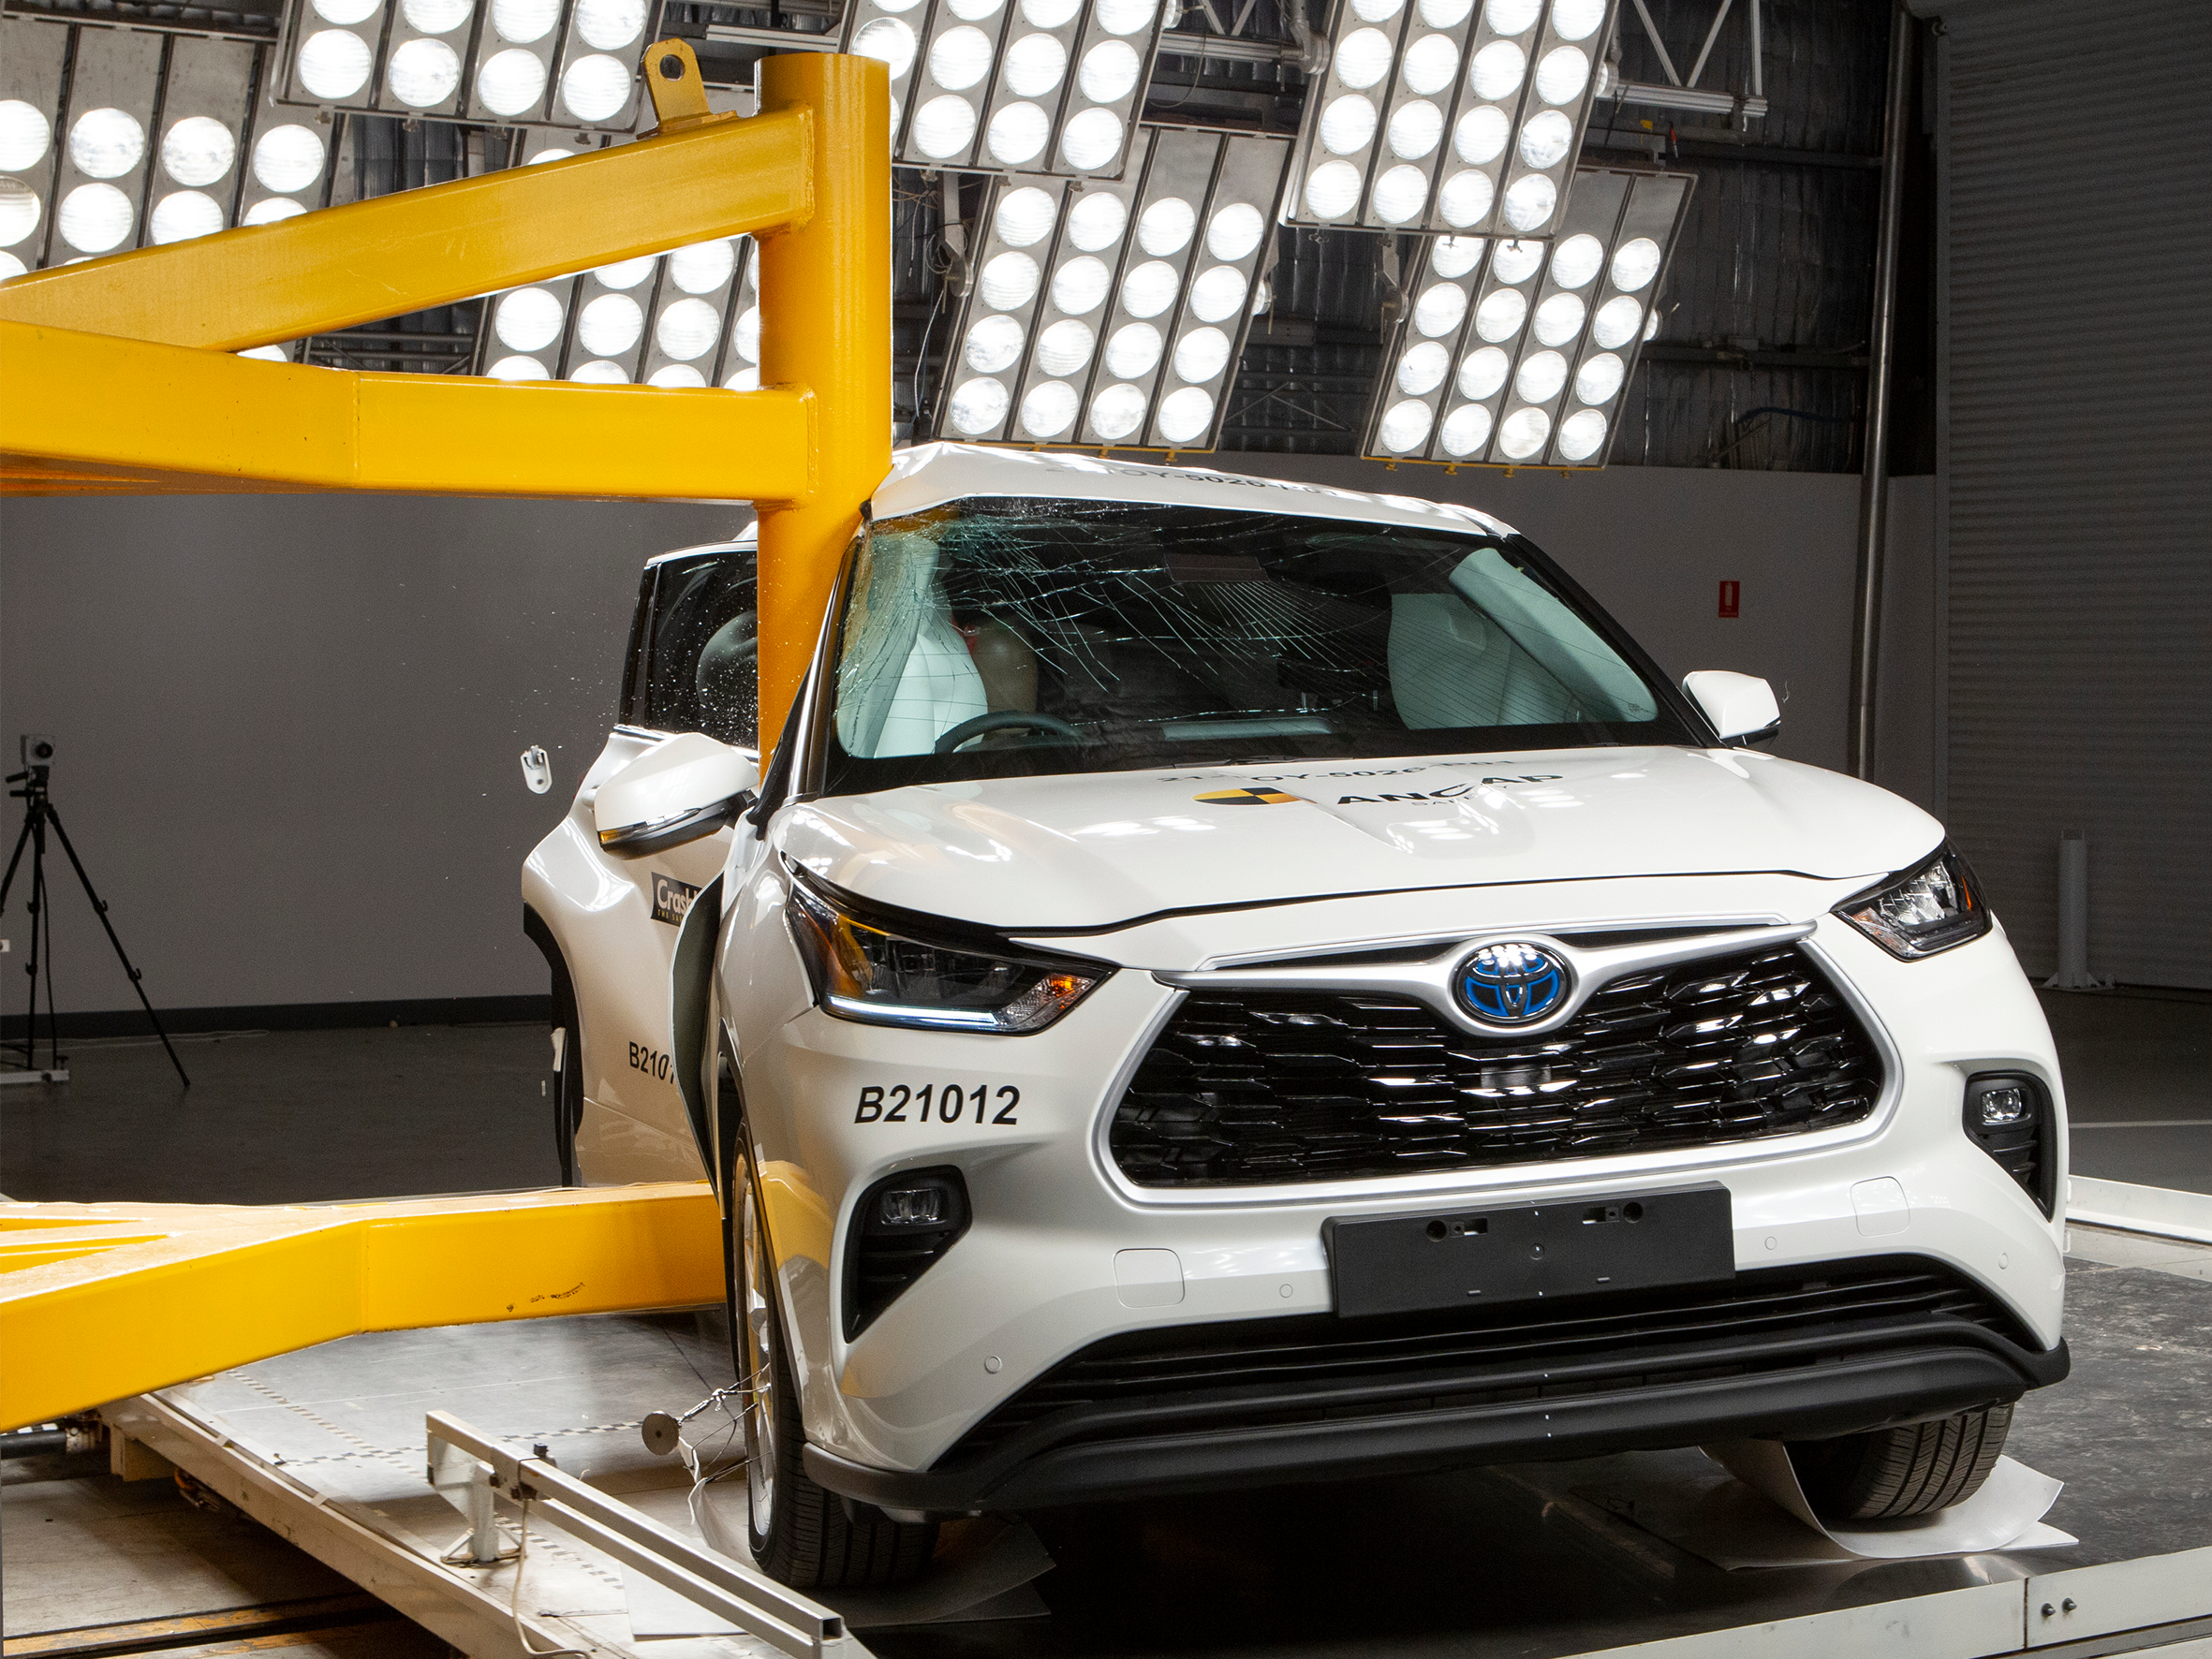 Toyota Kluger scores highly in latest ANCAP safety rating